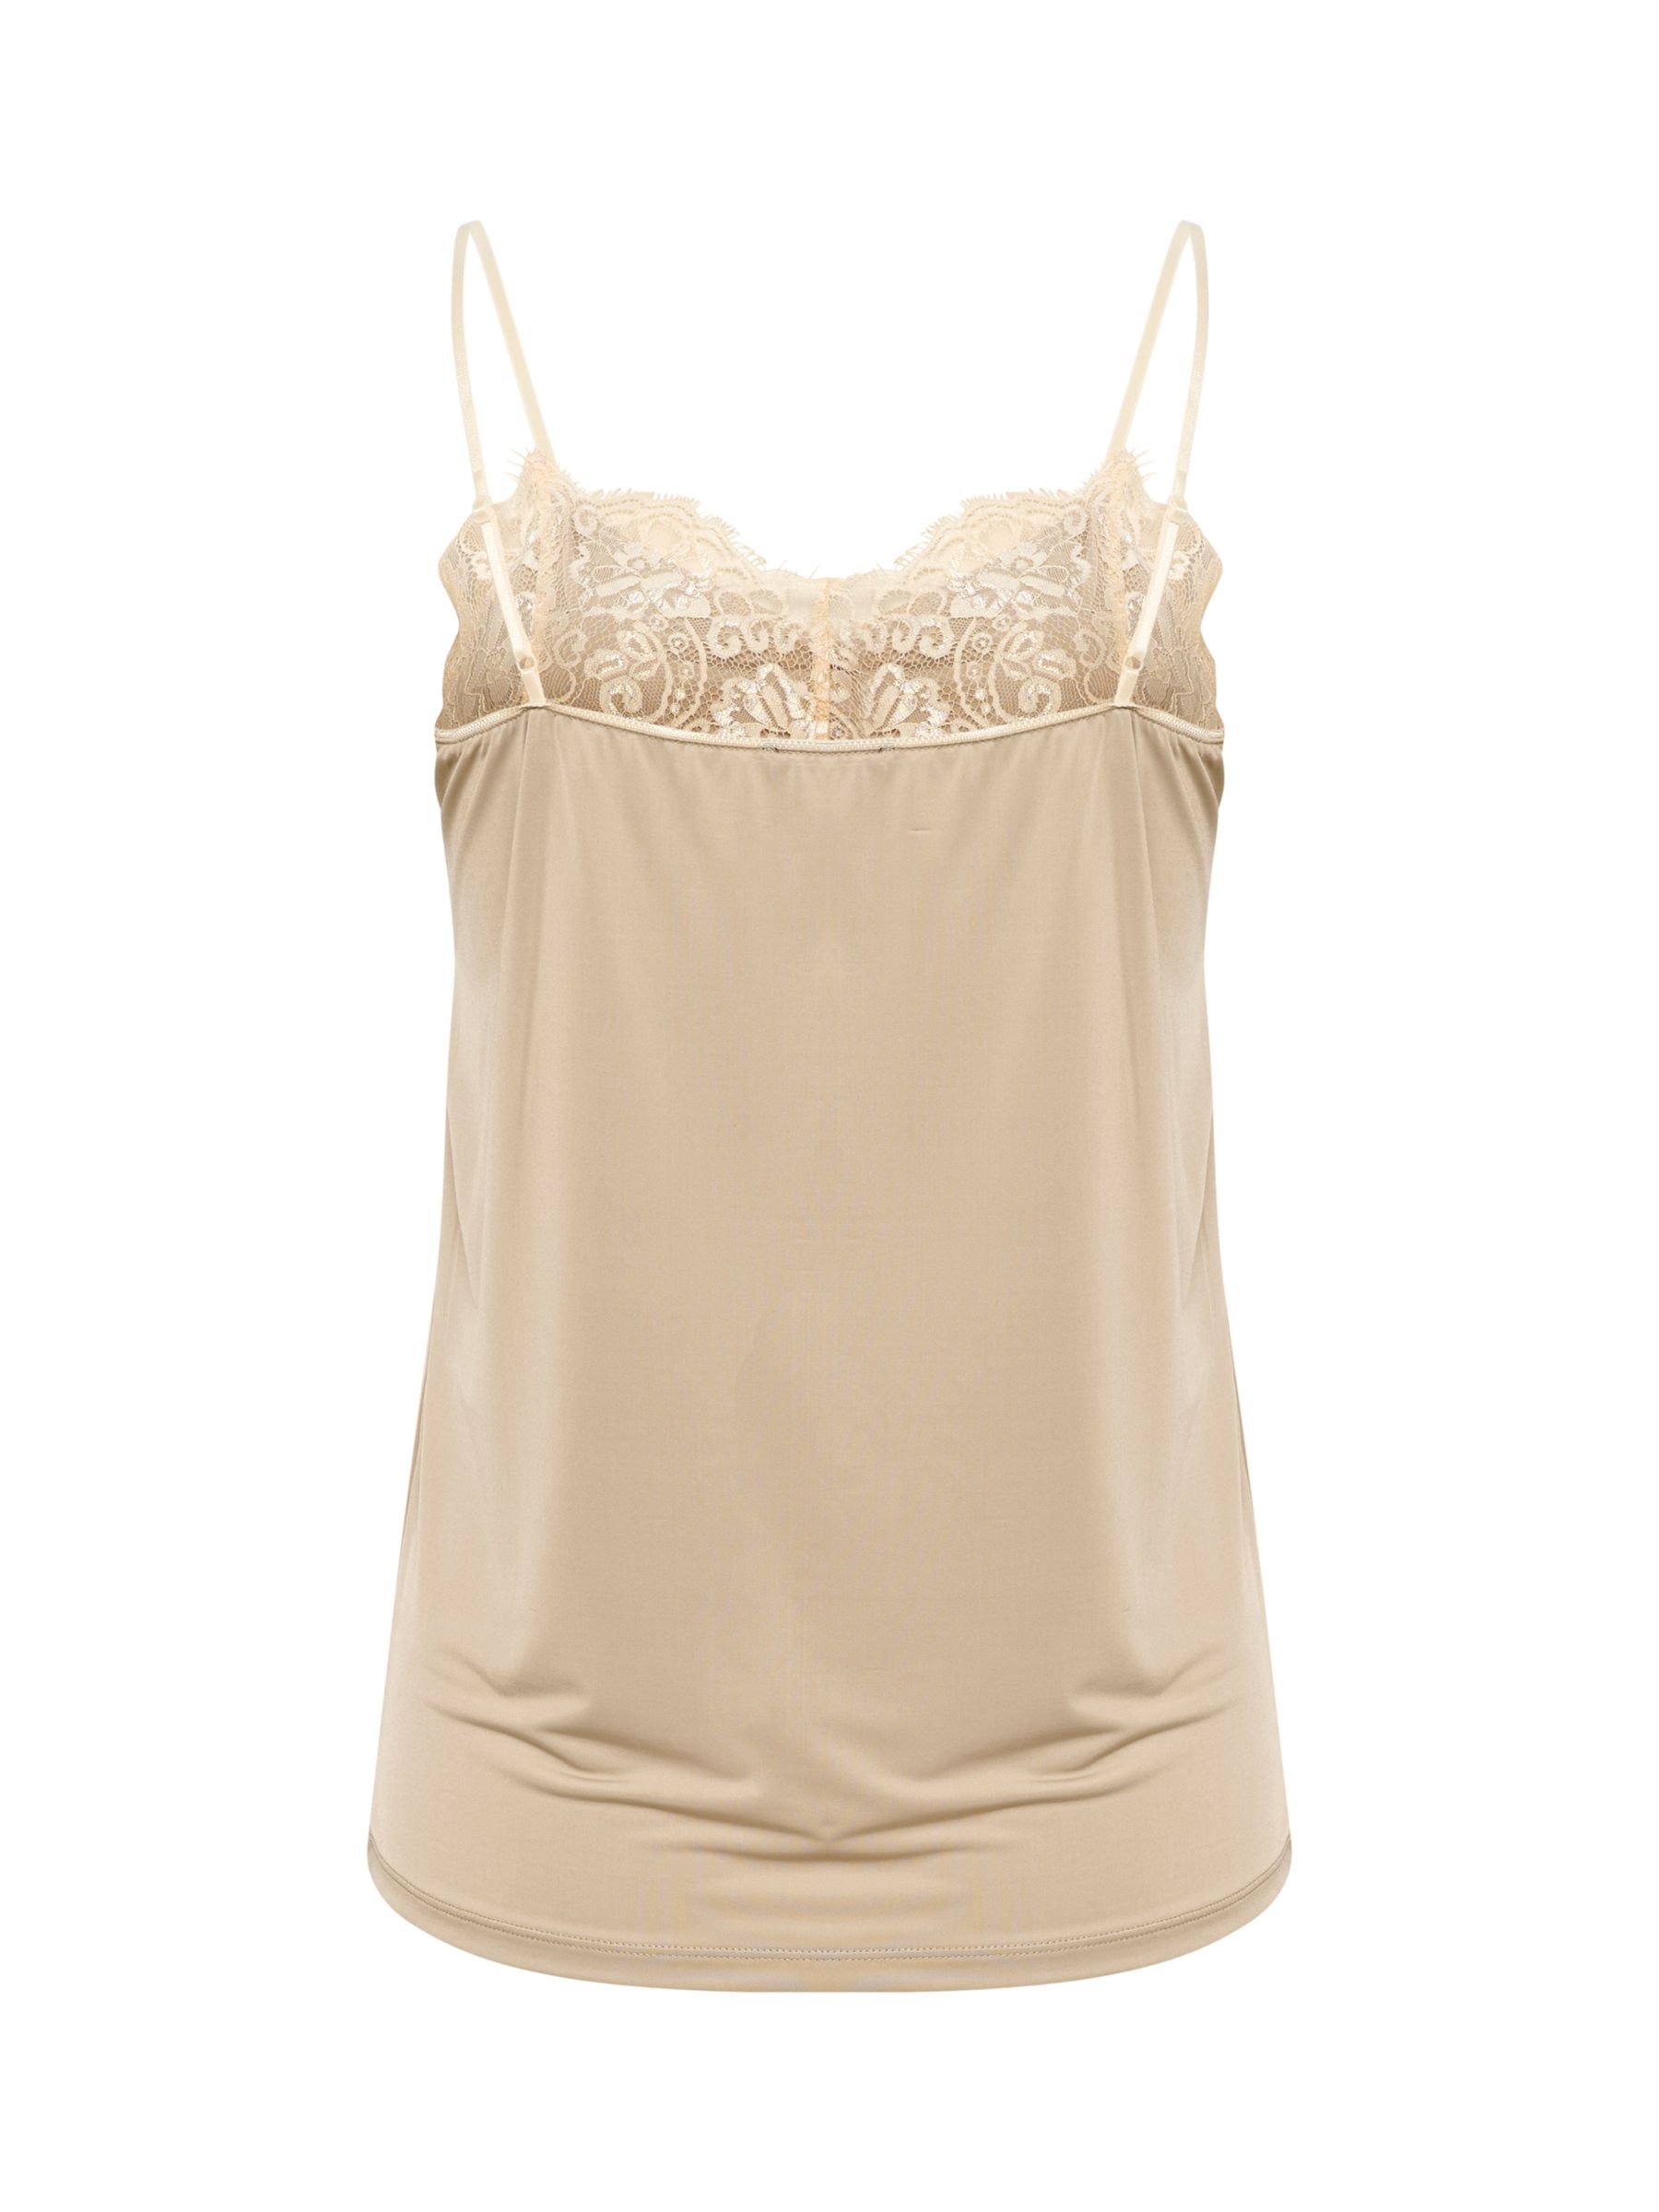 Buy Soaked In Luxury Cayla Lace V-Neck Singlet Top, Taupe Online at johnlewis.com